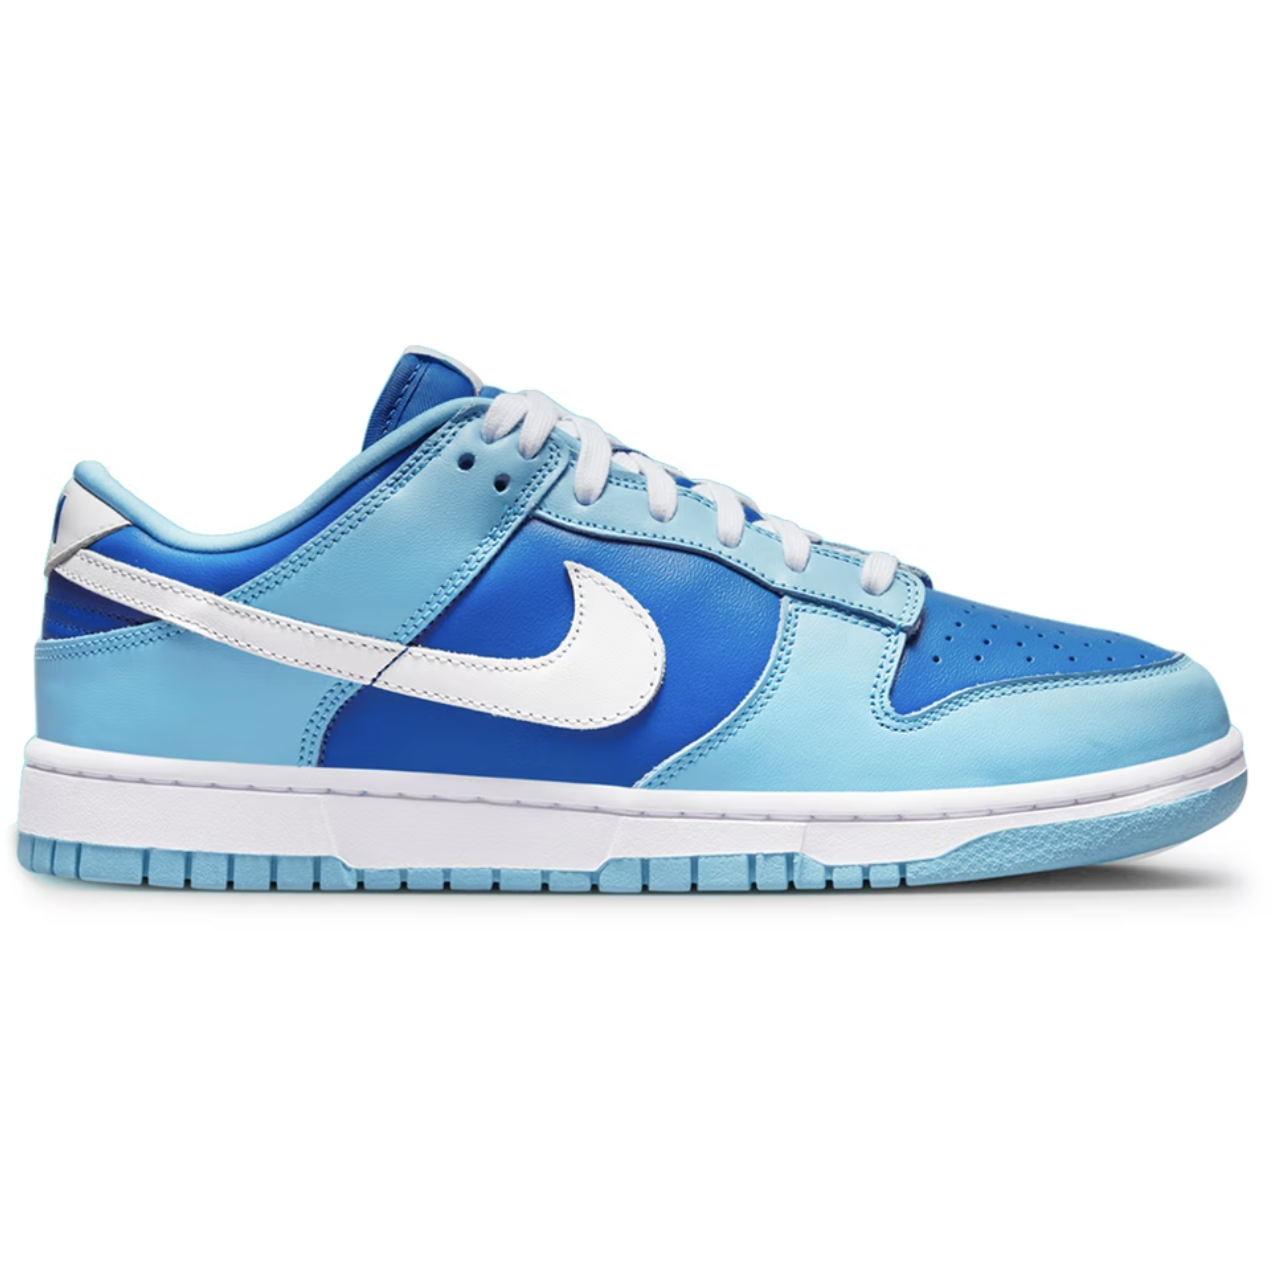 Nike Dunk Low Argon by Nike from £125.00